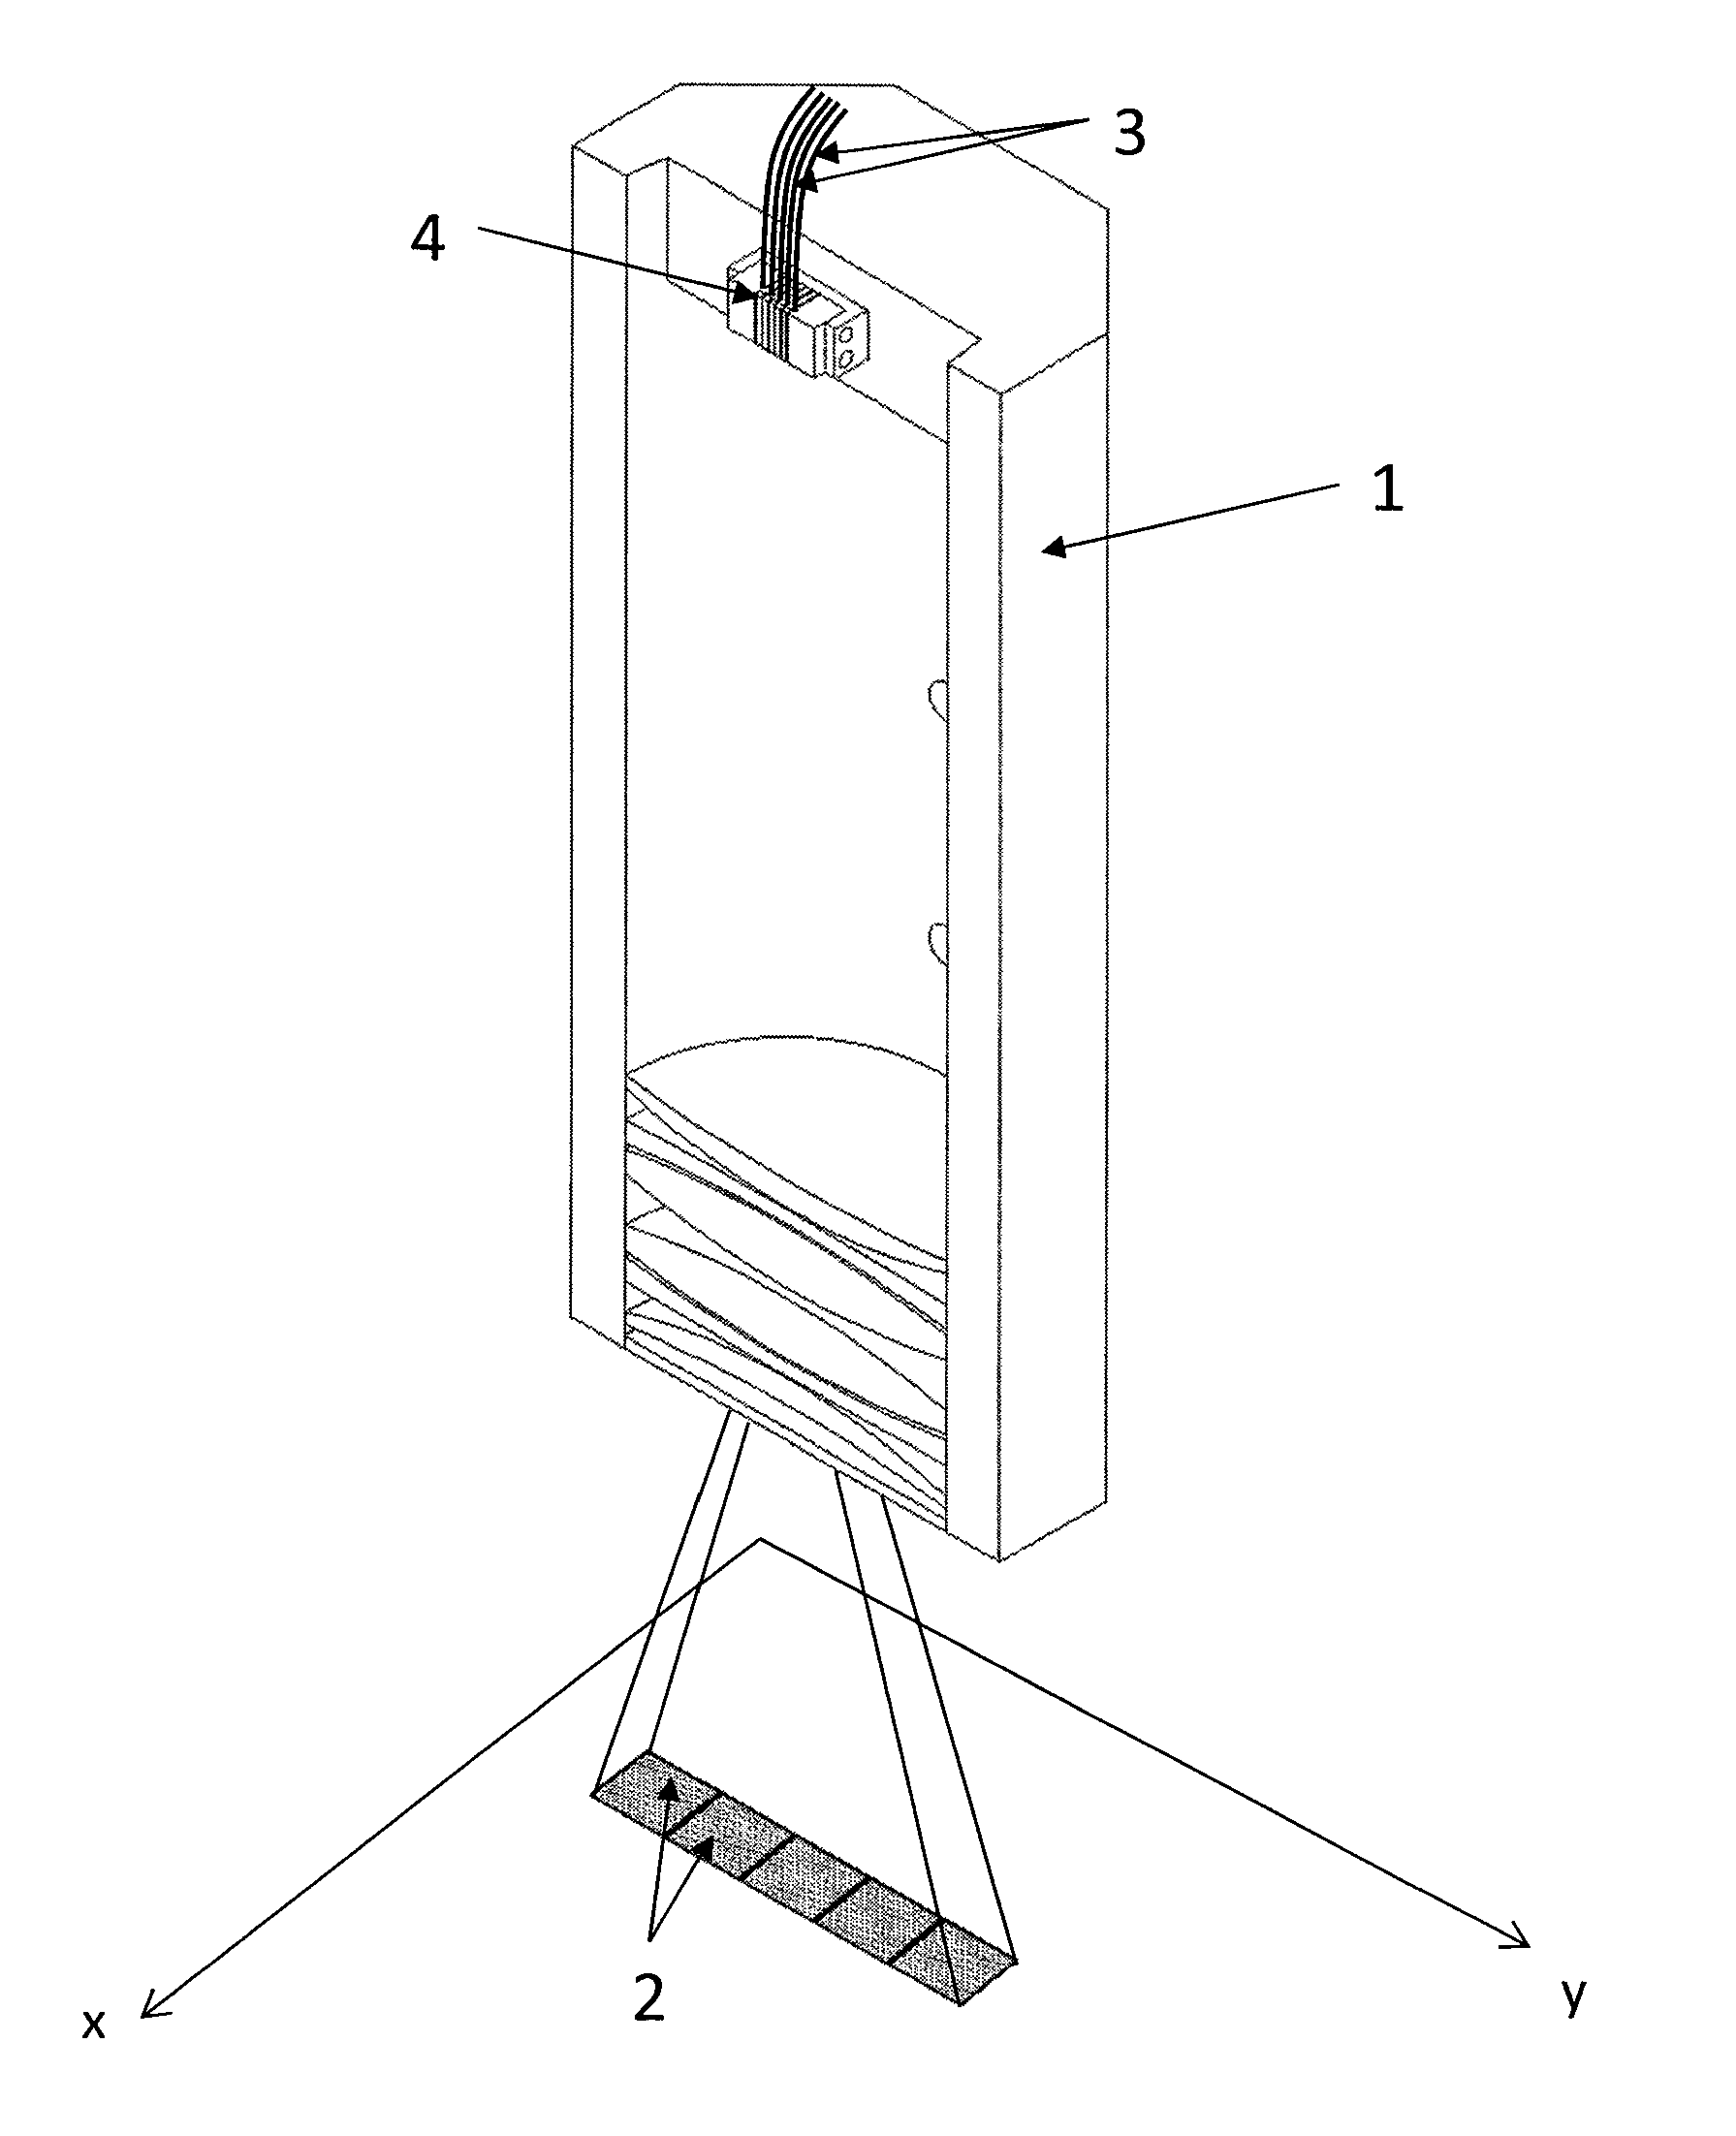 Device and method for generative component production